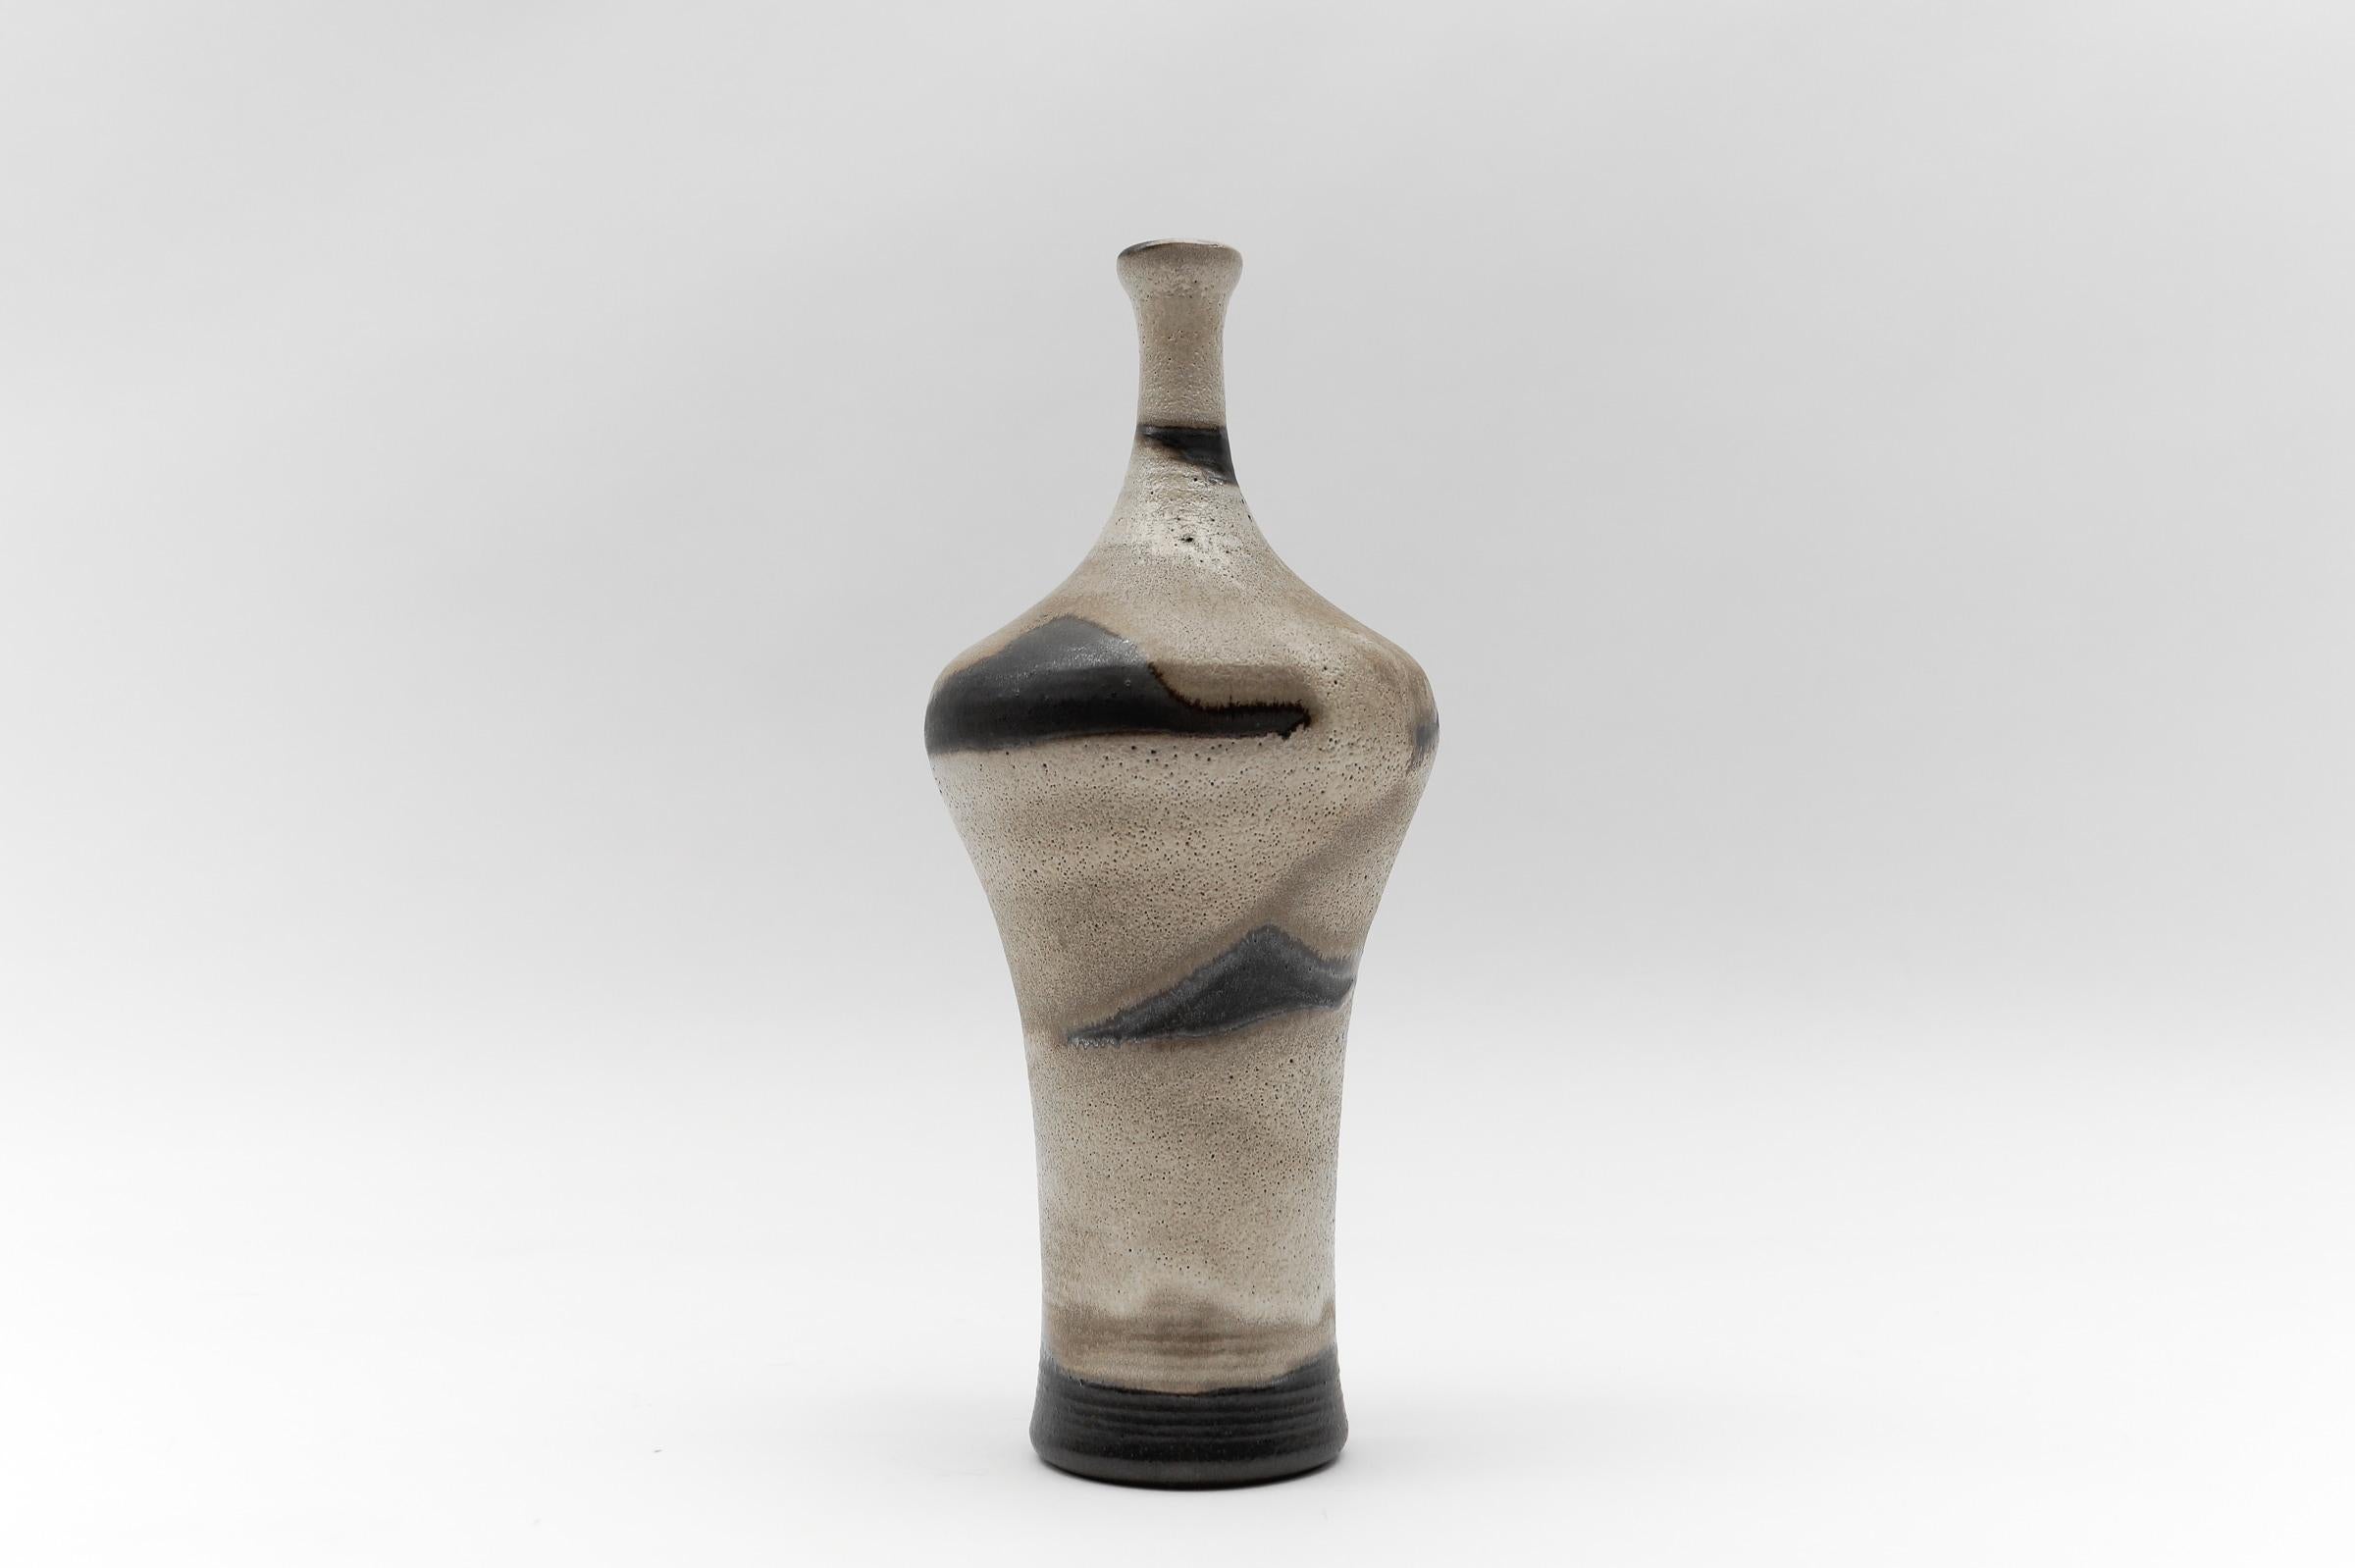 Studio Ceramic Vase by Elly Kuch for Wilhelm & Elly KUCH, 1960s, Germany

Dimensions:
Height: 11.02 in (28 cm)
Diameter: 4.72 (12 cm)

Very good condition.

-------------------------------------

Wilhelm Kuch, born 1925, 1947 apprenticeship - Gusso